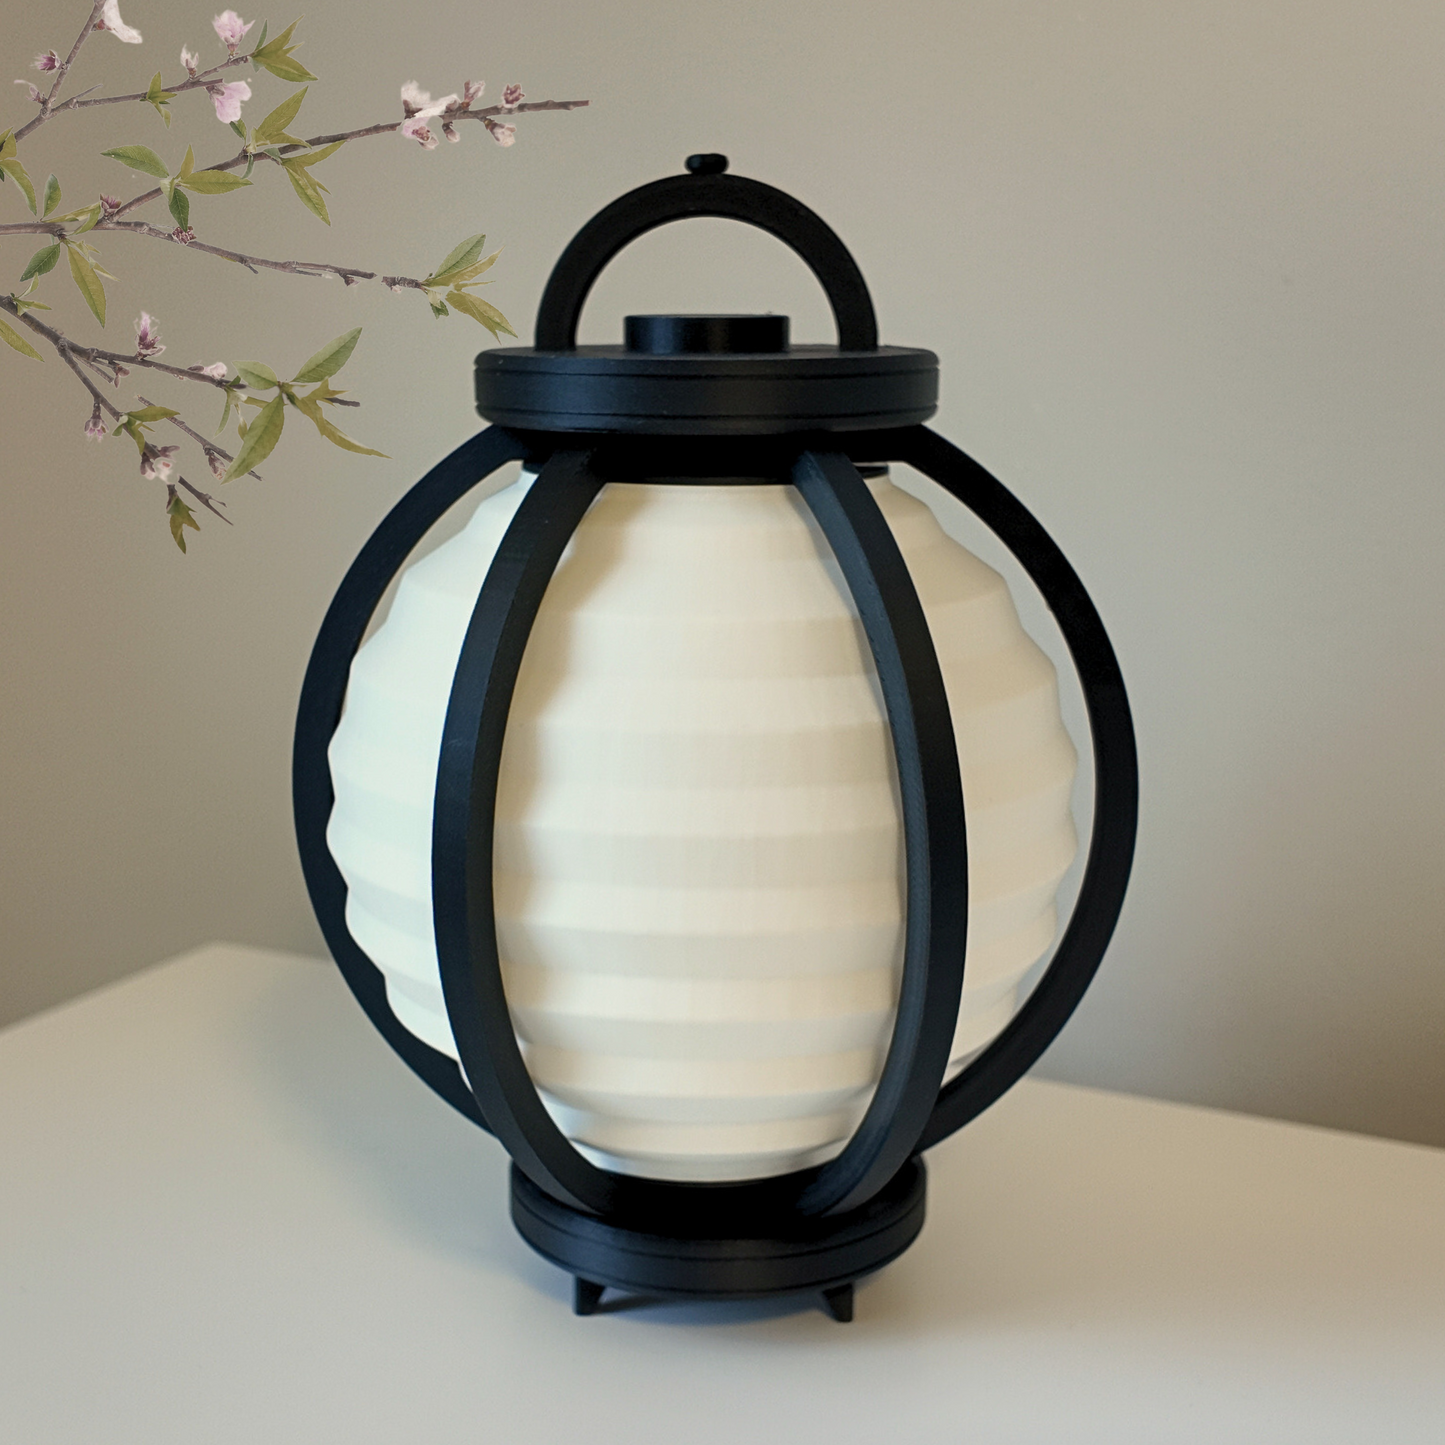 Chinese Lantern - Exquisite Chinese Decor for Home and Room | Unique Desk Lamp and Table Lamp Design | Transforms Any Space | Japanese Decor